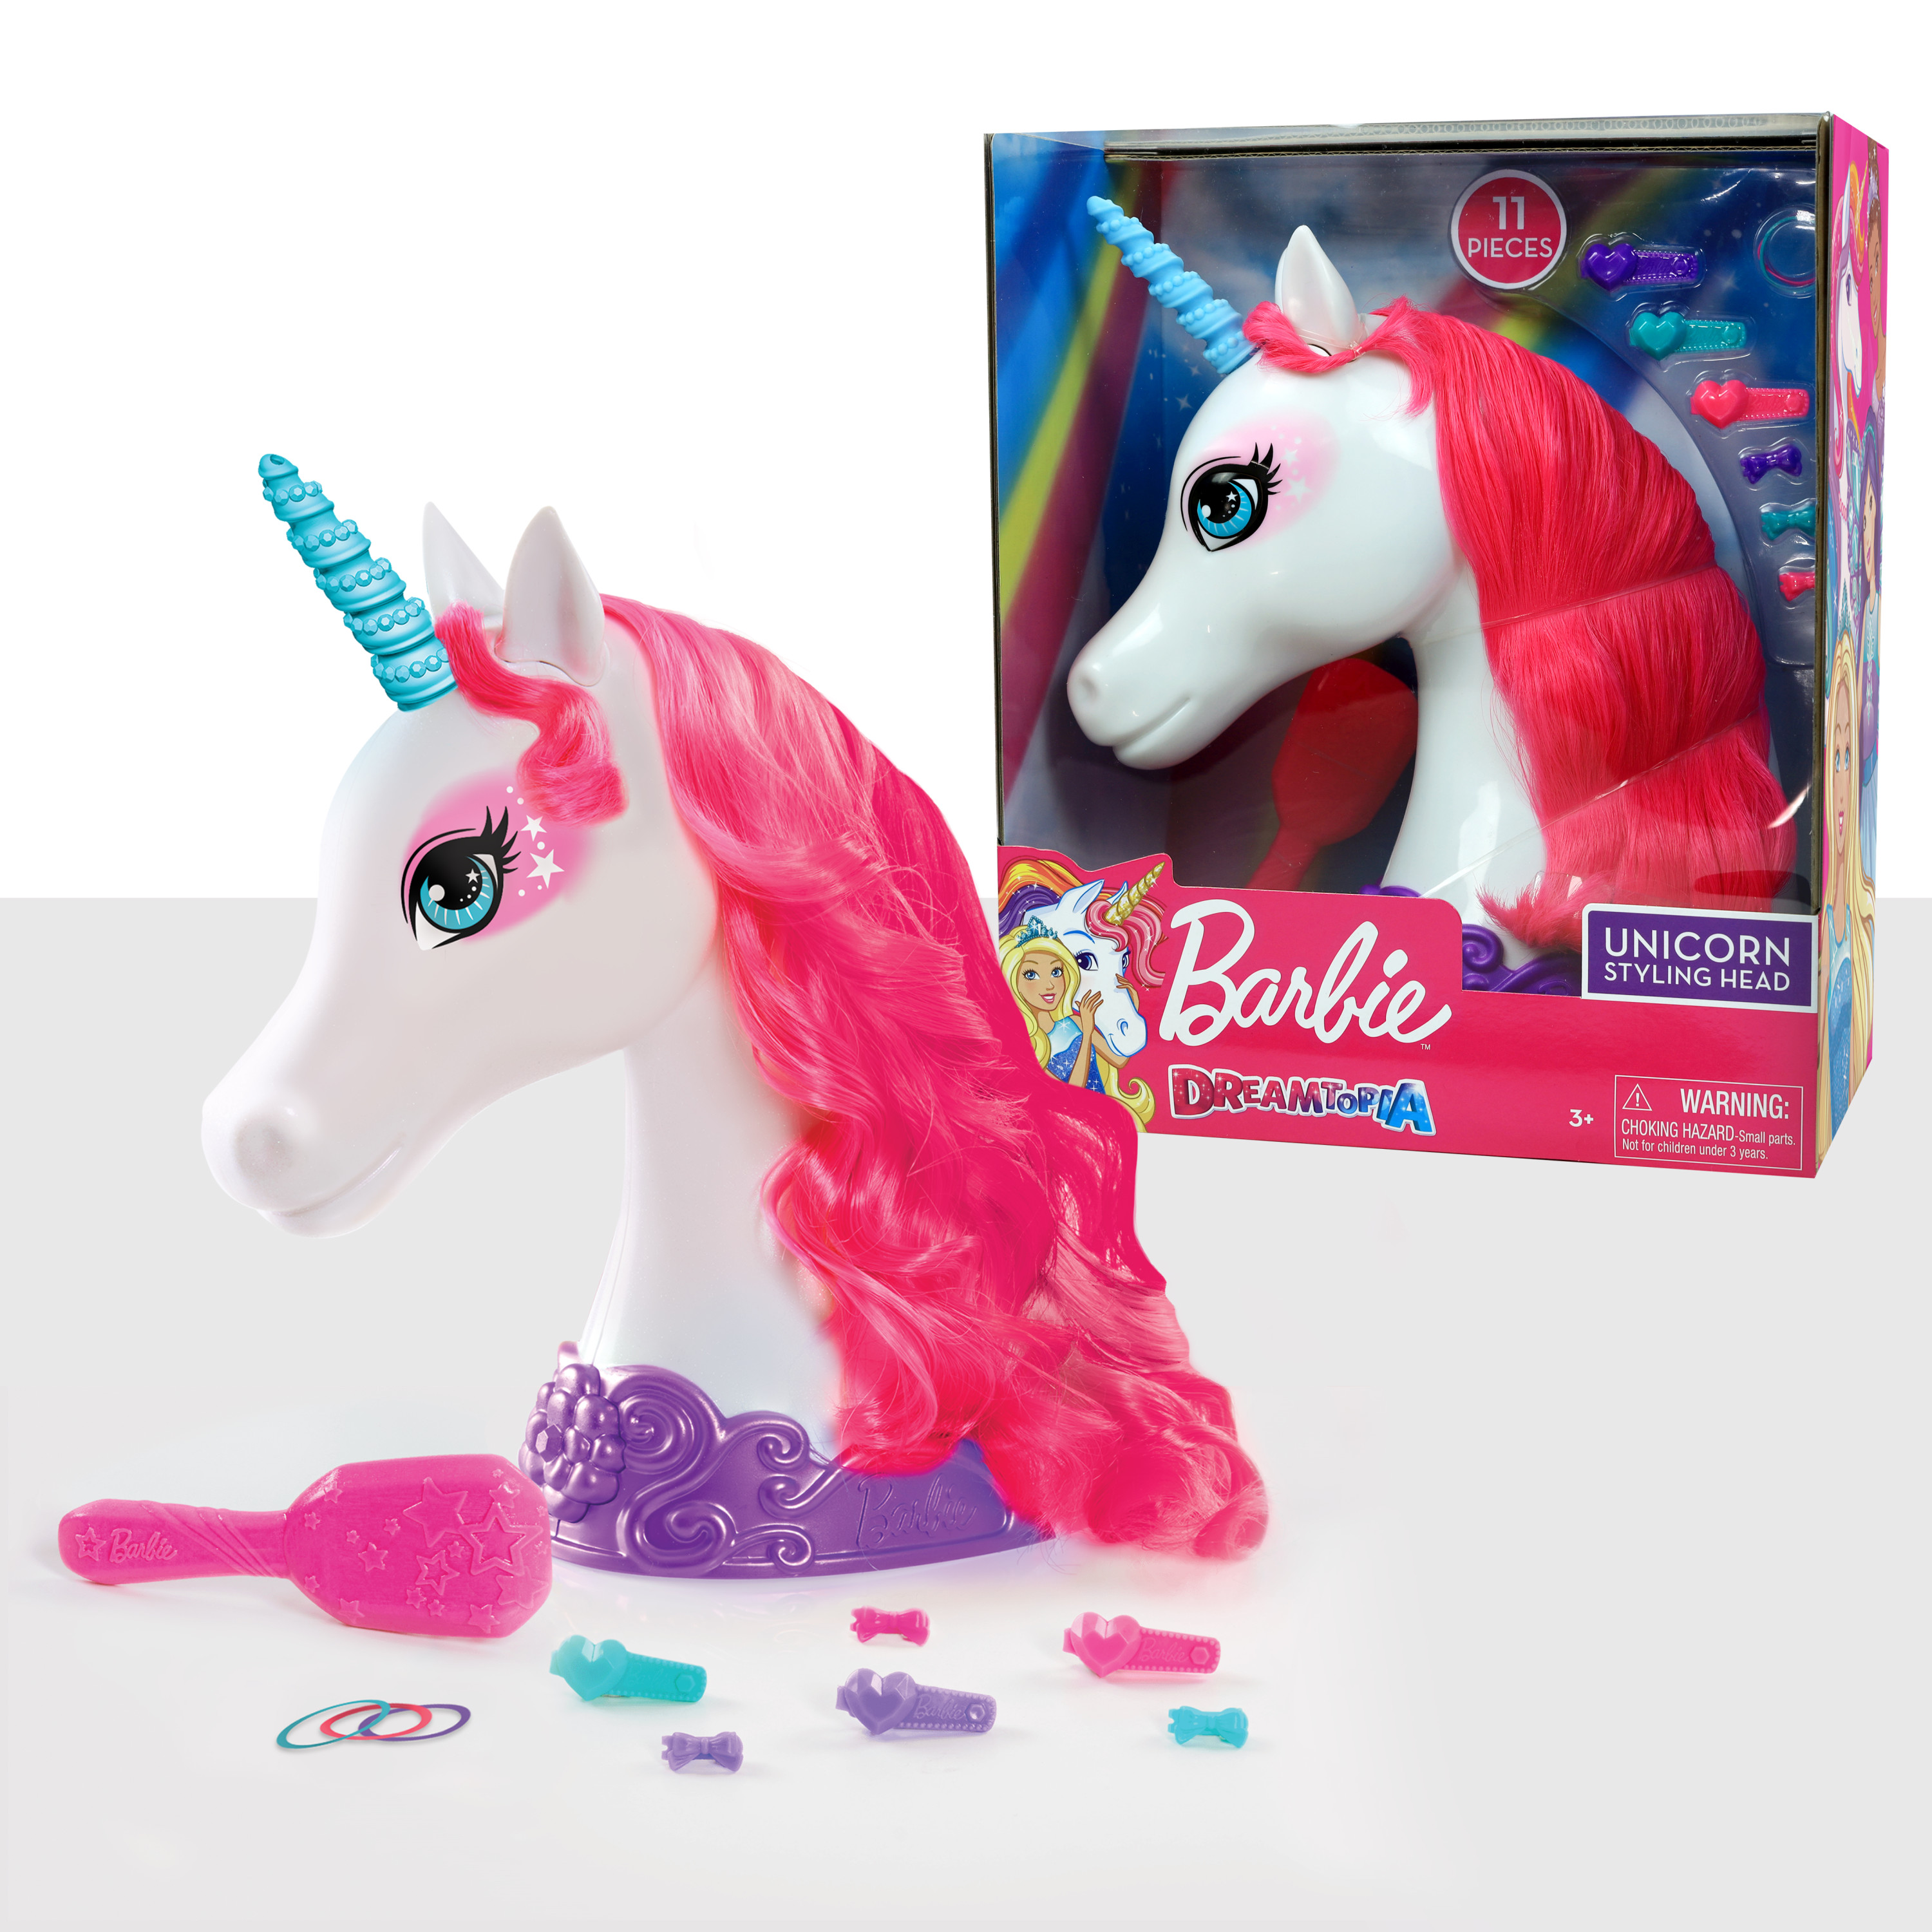 Barbie Dreamtopia 11-Piece Unicorn Styling Head,  Kids Toys for Ages 3 Up, Gifts and Presents - image 1 of 5